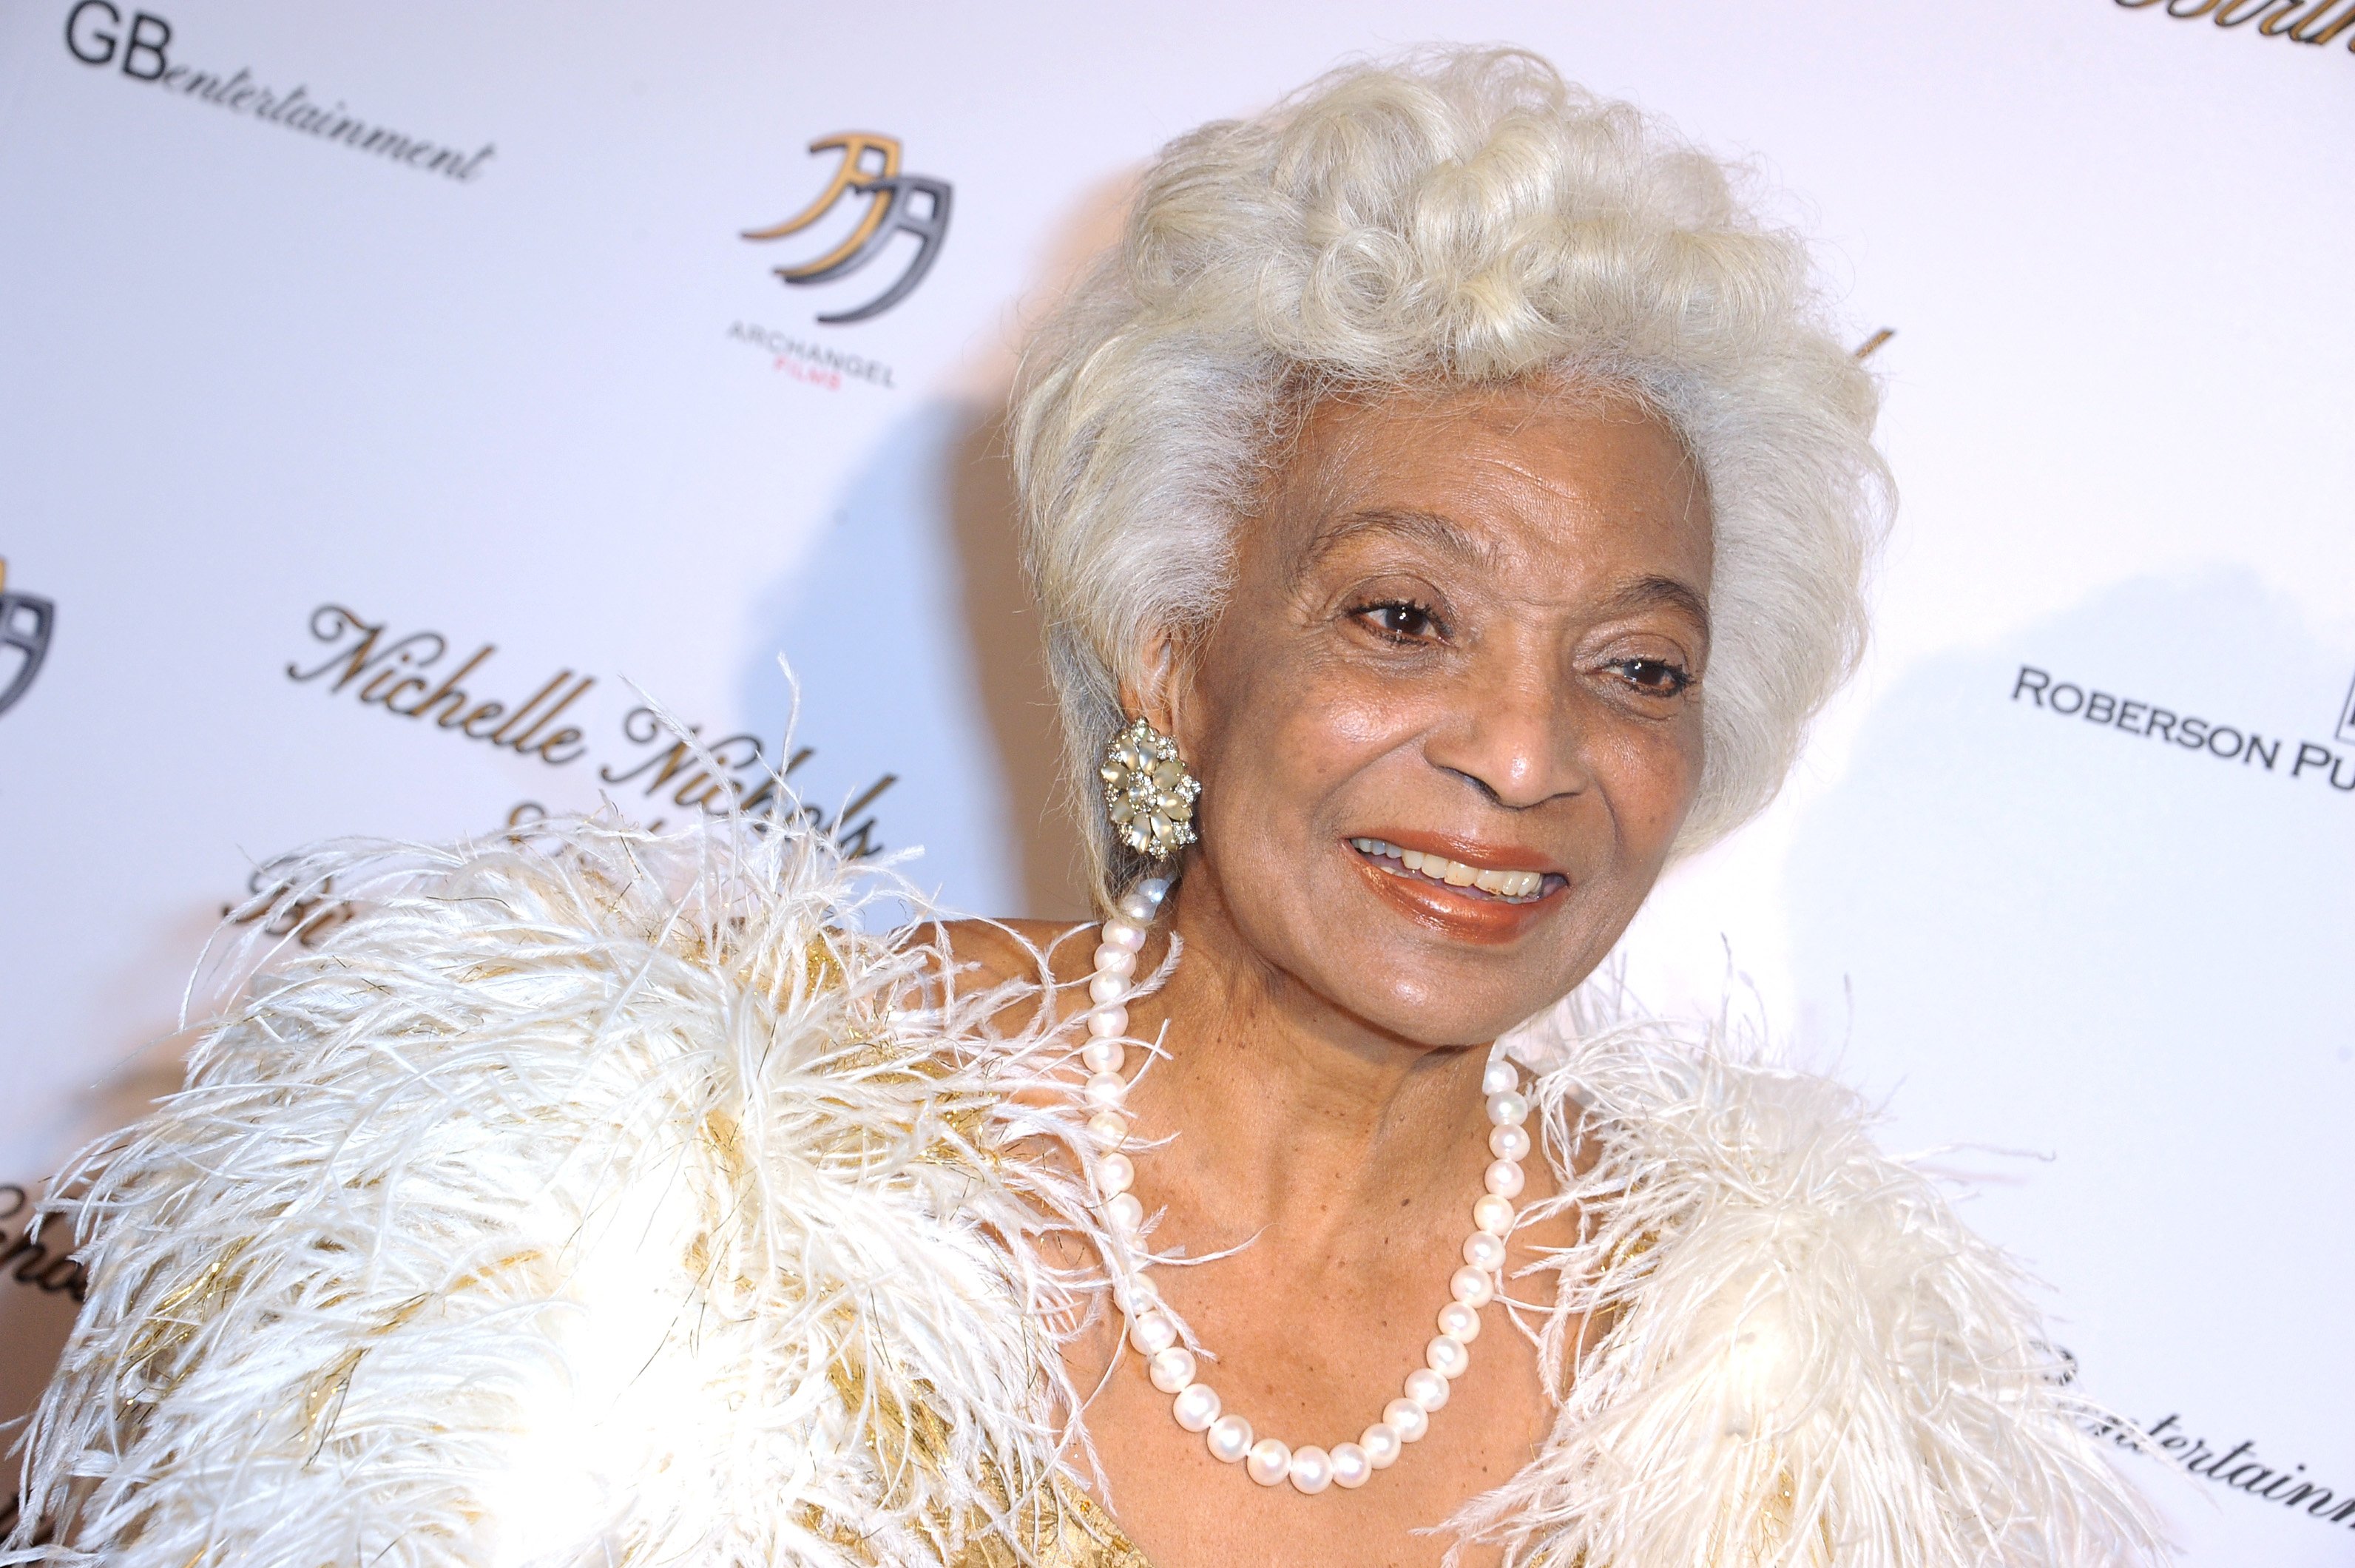 Nichelle Nichols at her 85th birthday celebration held at La Piazza/The Grove on December 28, 2017, in Los Angeles, California. | Source: Getty Images